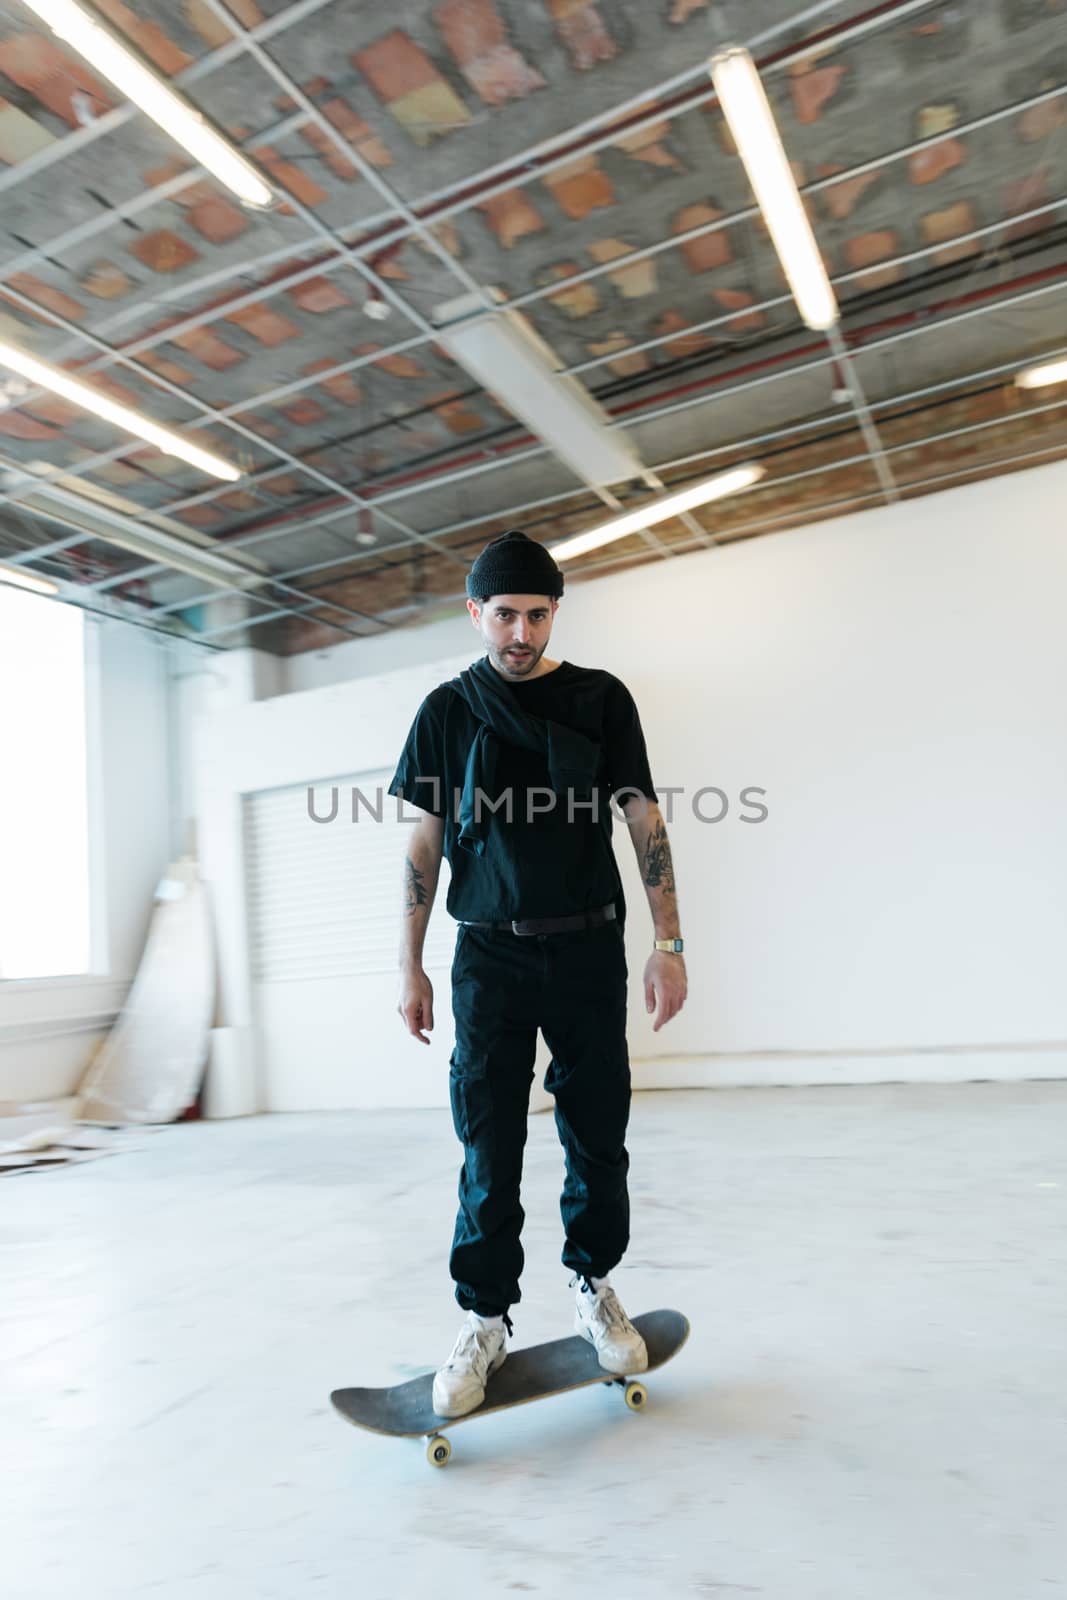 Young skater on his board in motion staring at the camera by camerarules